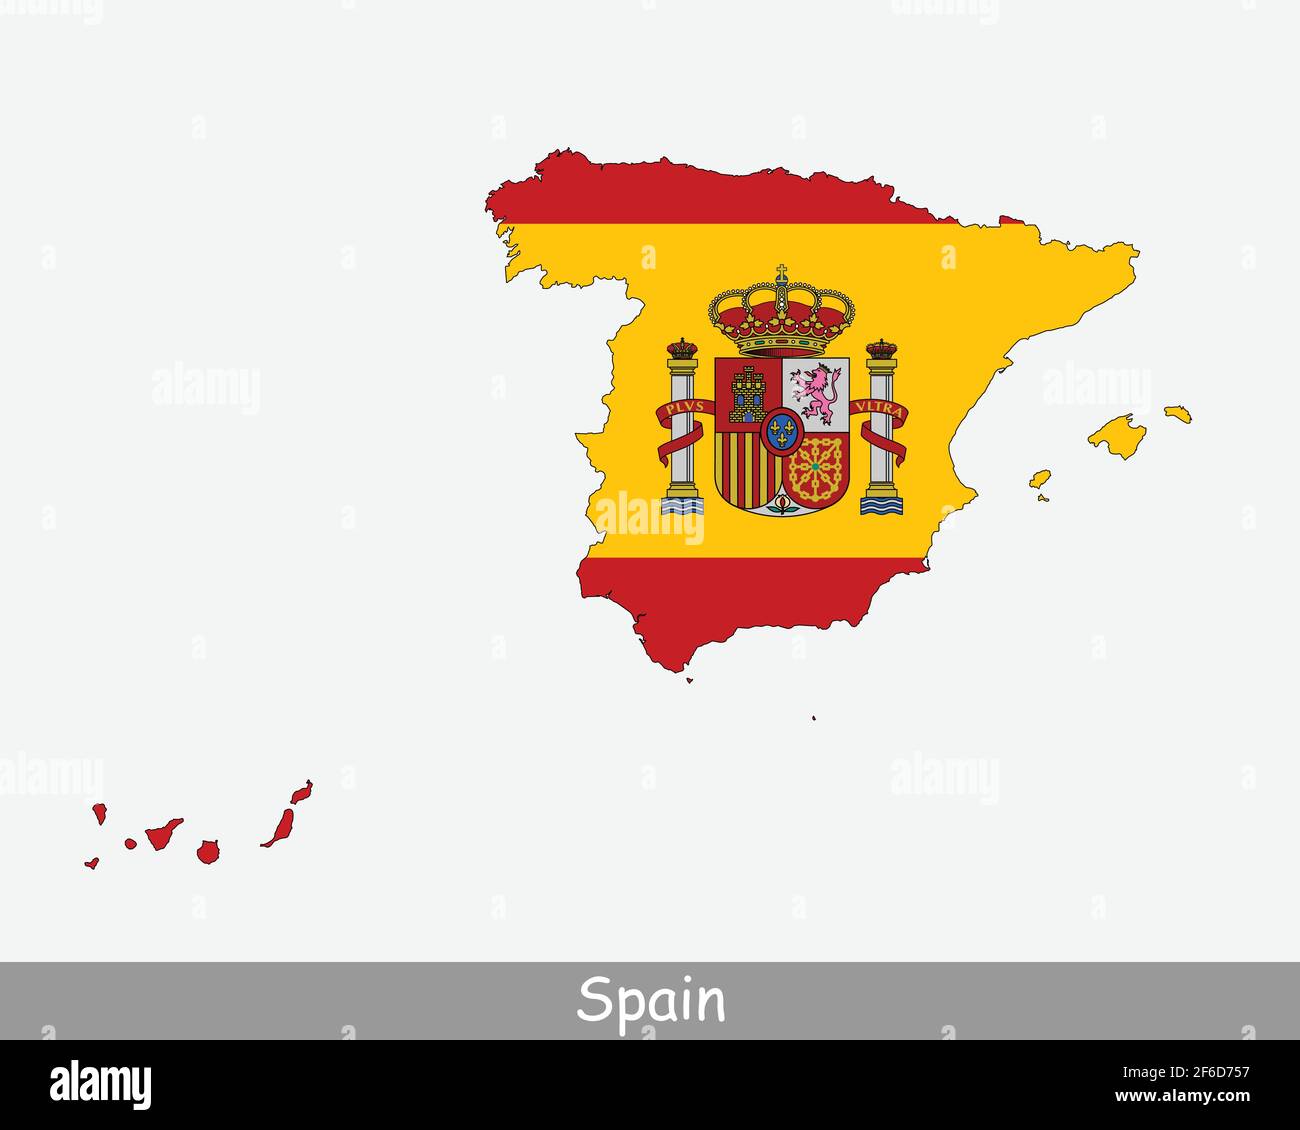 Spain Flag Map. Map of the Kingdom of Spain with the Spanish national flag isolated on a white background. Vector Illustration Stock Vector